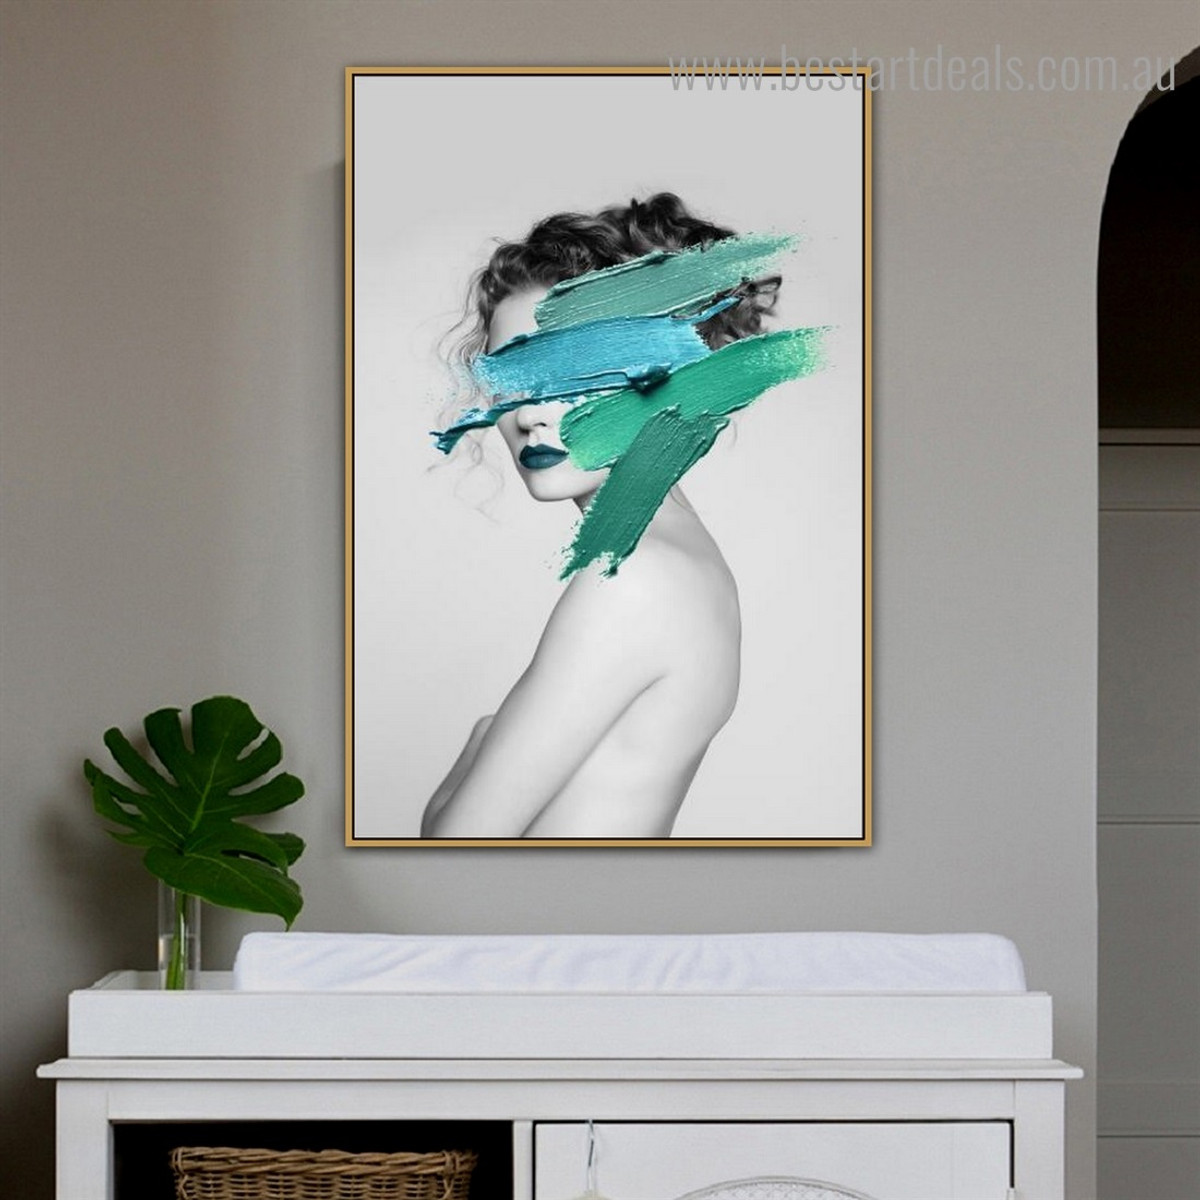 Turquoise Paint Lady Abstract Fashion Modern Framed Artwork Image Canvas Print for Room Wall Decor